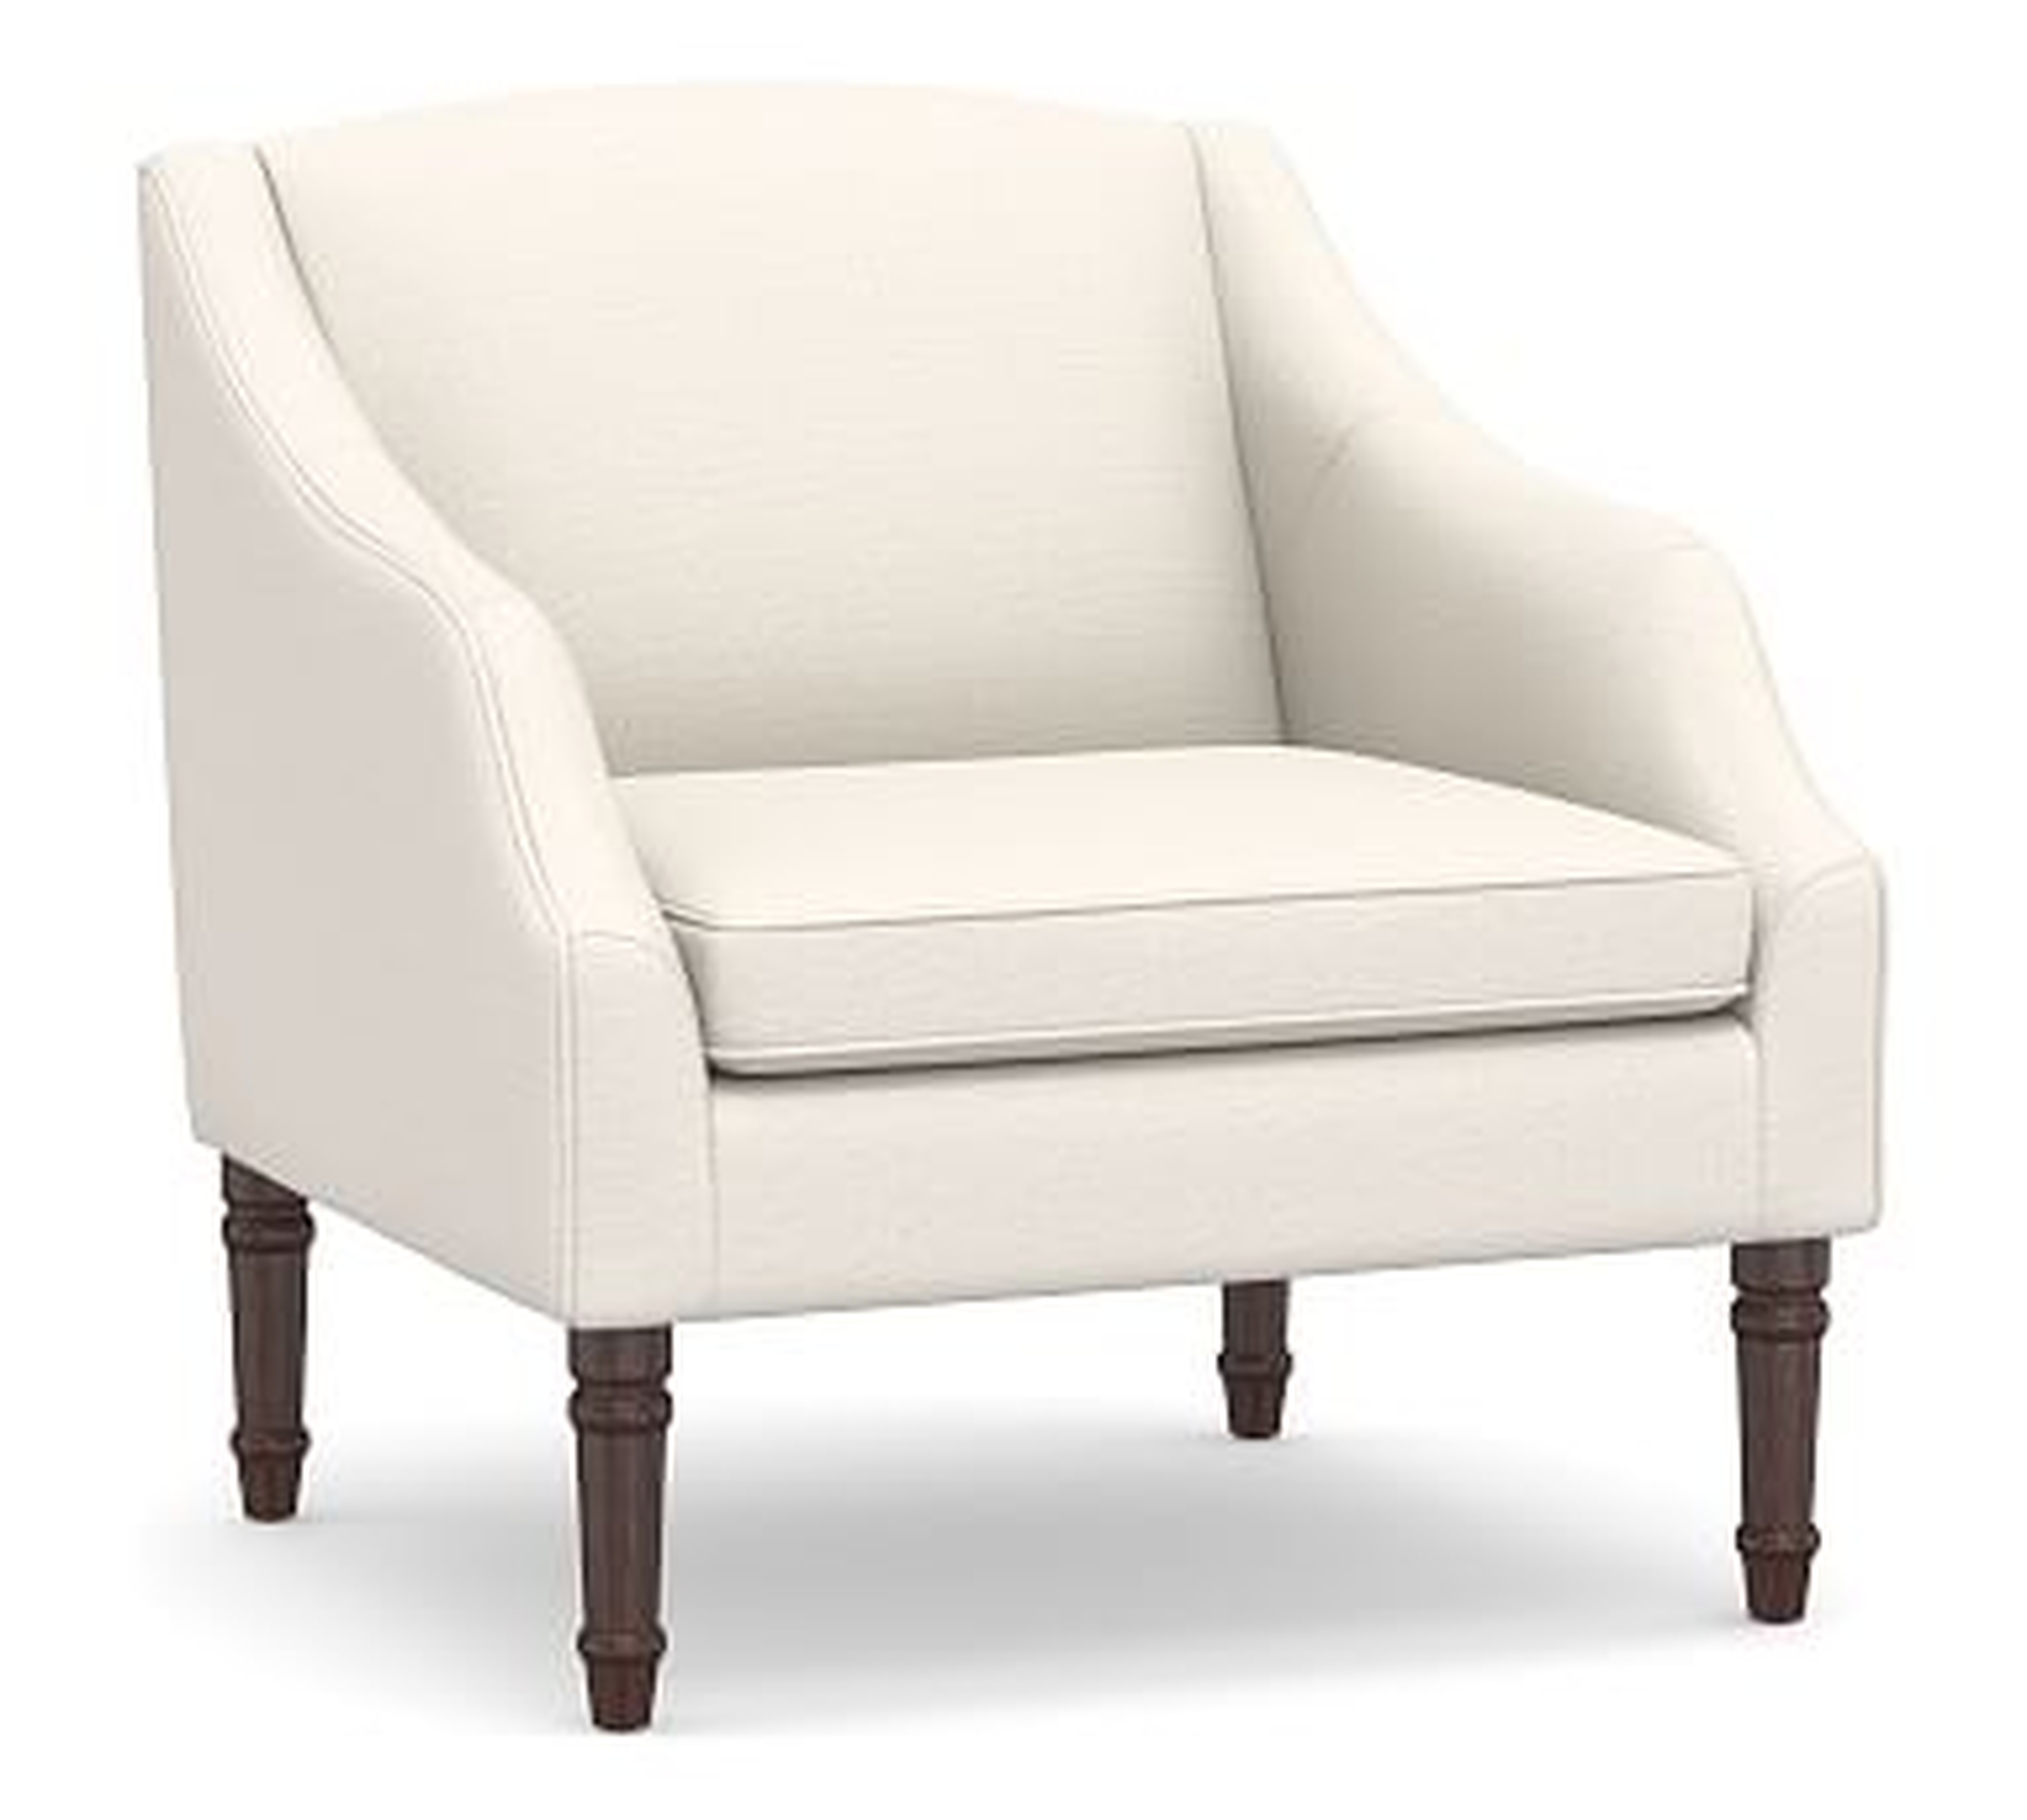 SoMa Emma Upholstered Armchair, Polyester Wrapped Cushions, Performance Chateau Basketweave Ivory - Pottery Barn